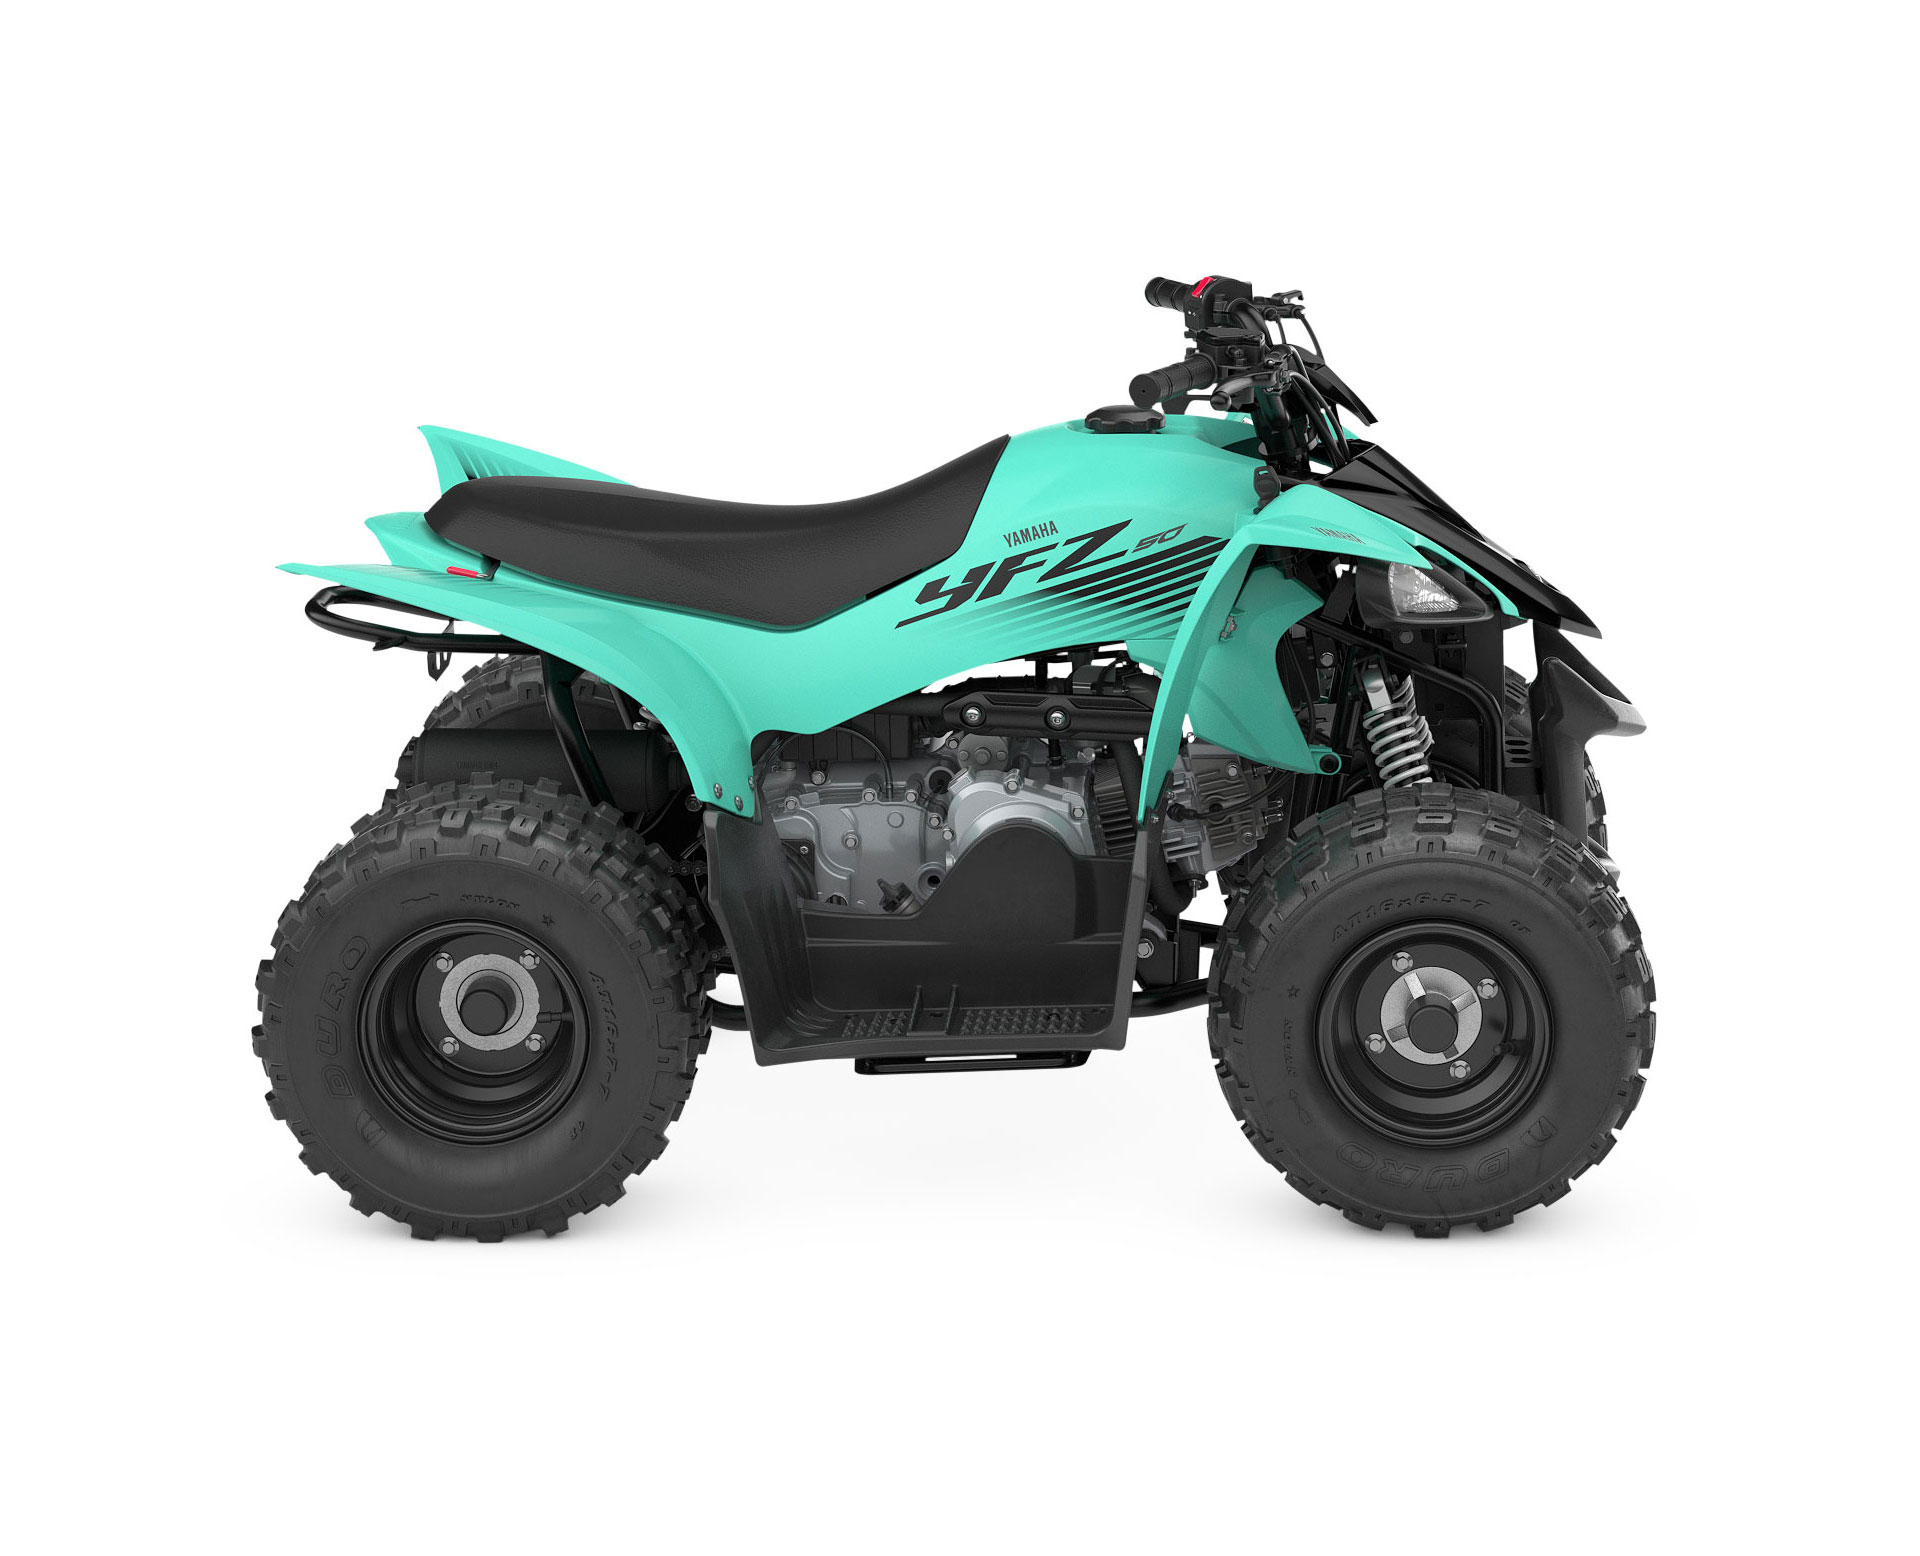 Thumbnail of your customized 2024 YFZ50